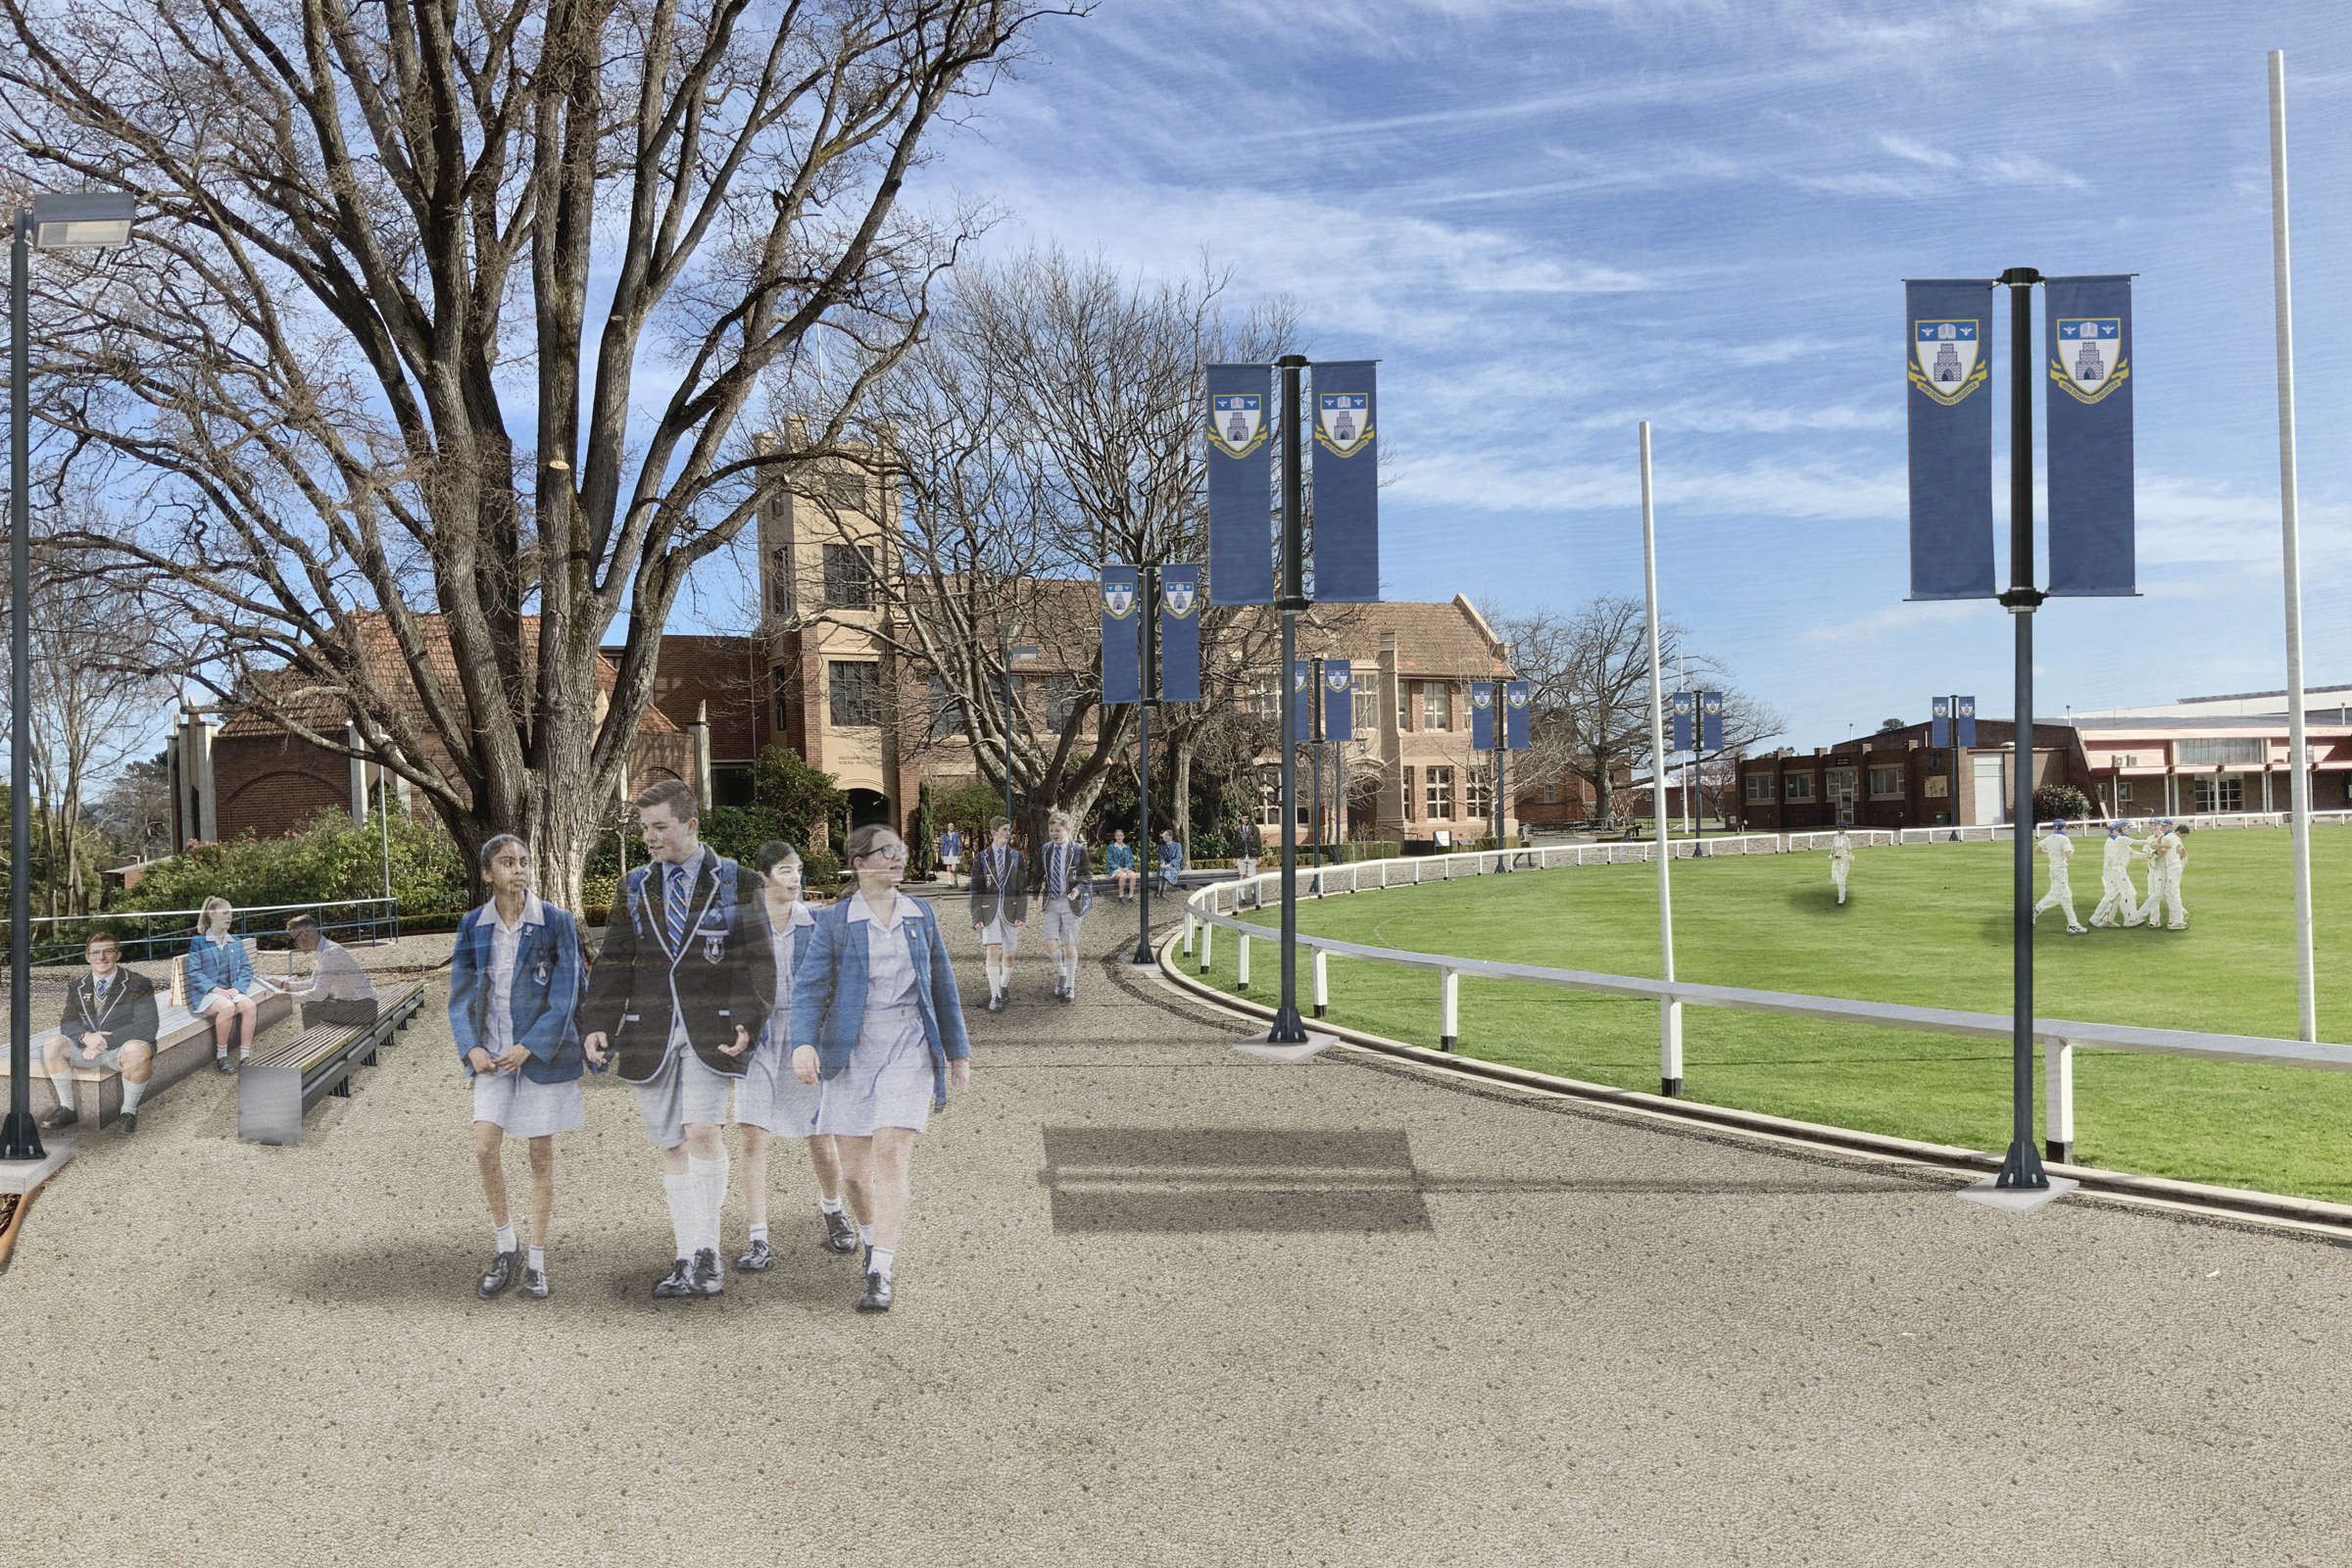 Launceston Church Grammar School Senior Campus Master Plan: The memorable arrival sequence emphasizes heritage features and the oval, improves pedestrian safety and reduces vehicular dominance and traffic congestion. Render by Morrison & Breytenbach Architects. Photo by Morrison & Breytenbach Architects.